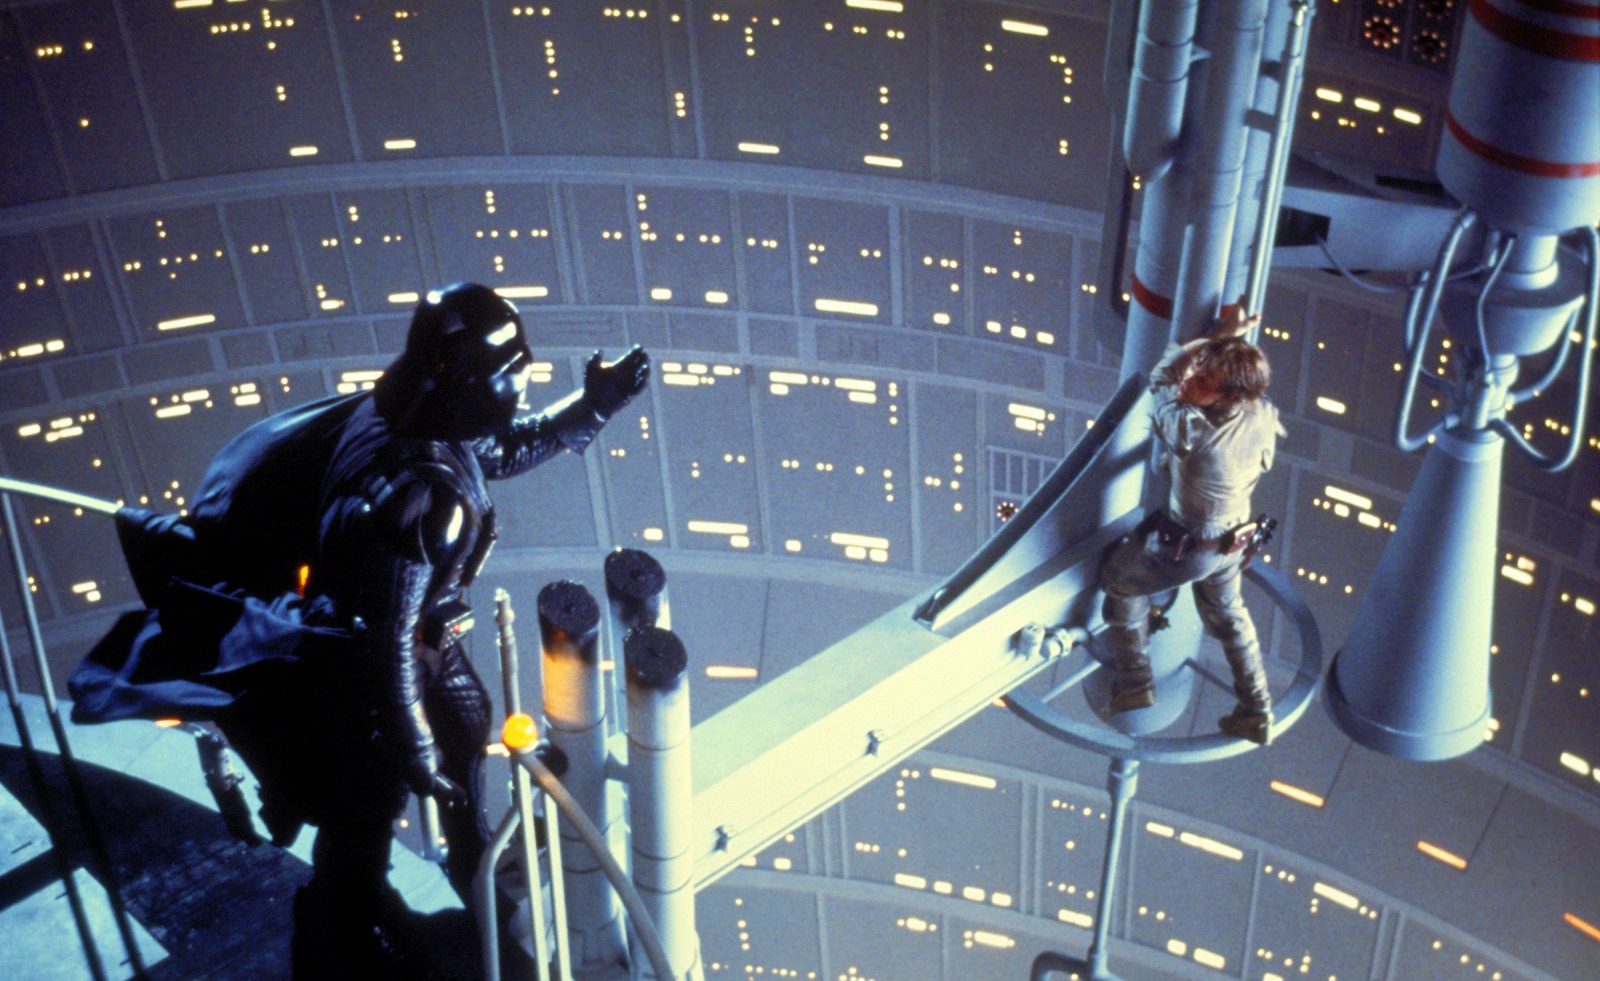 Which Star Wars Character Are You? Star Wars Episode V – The Empire Strikes Back